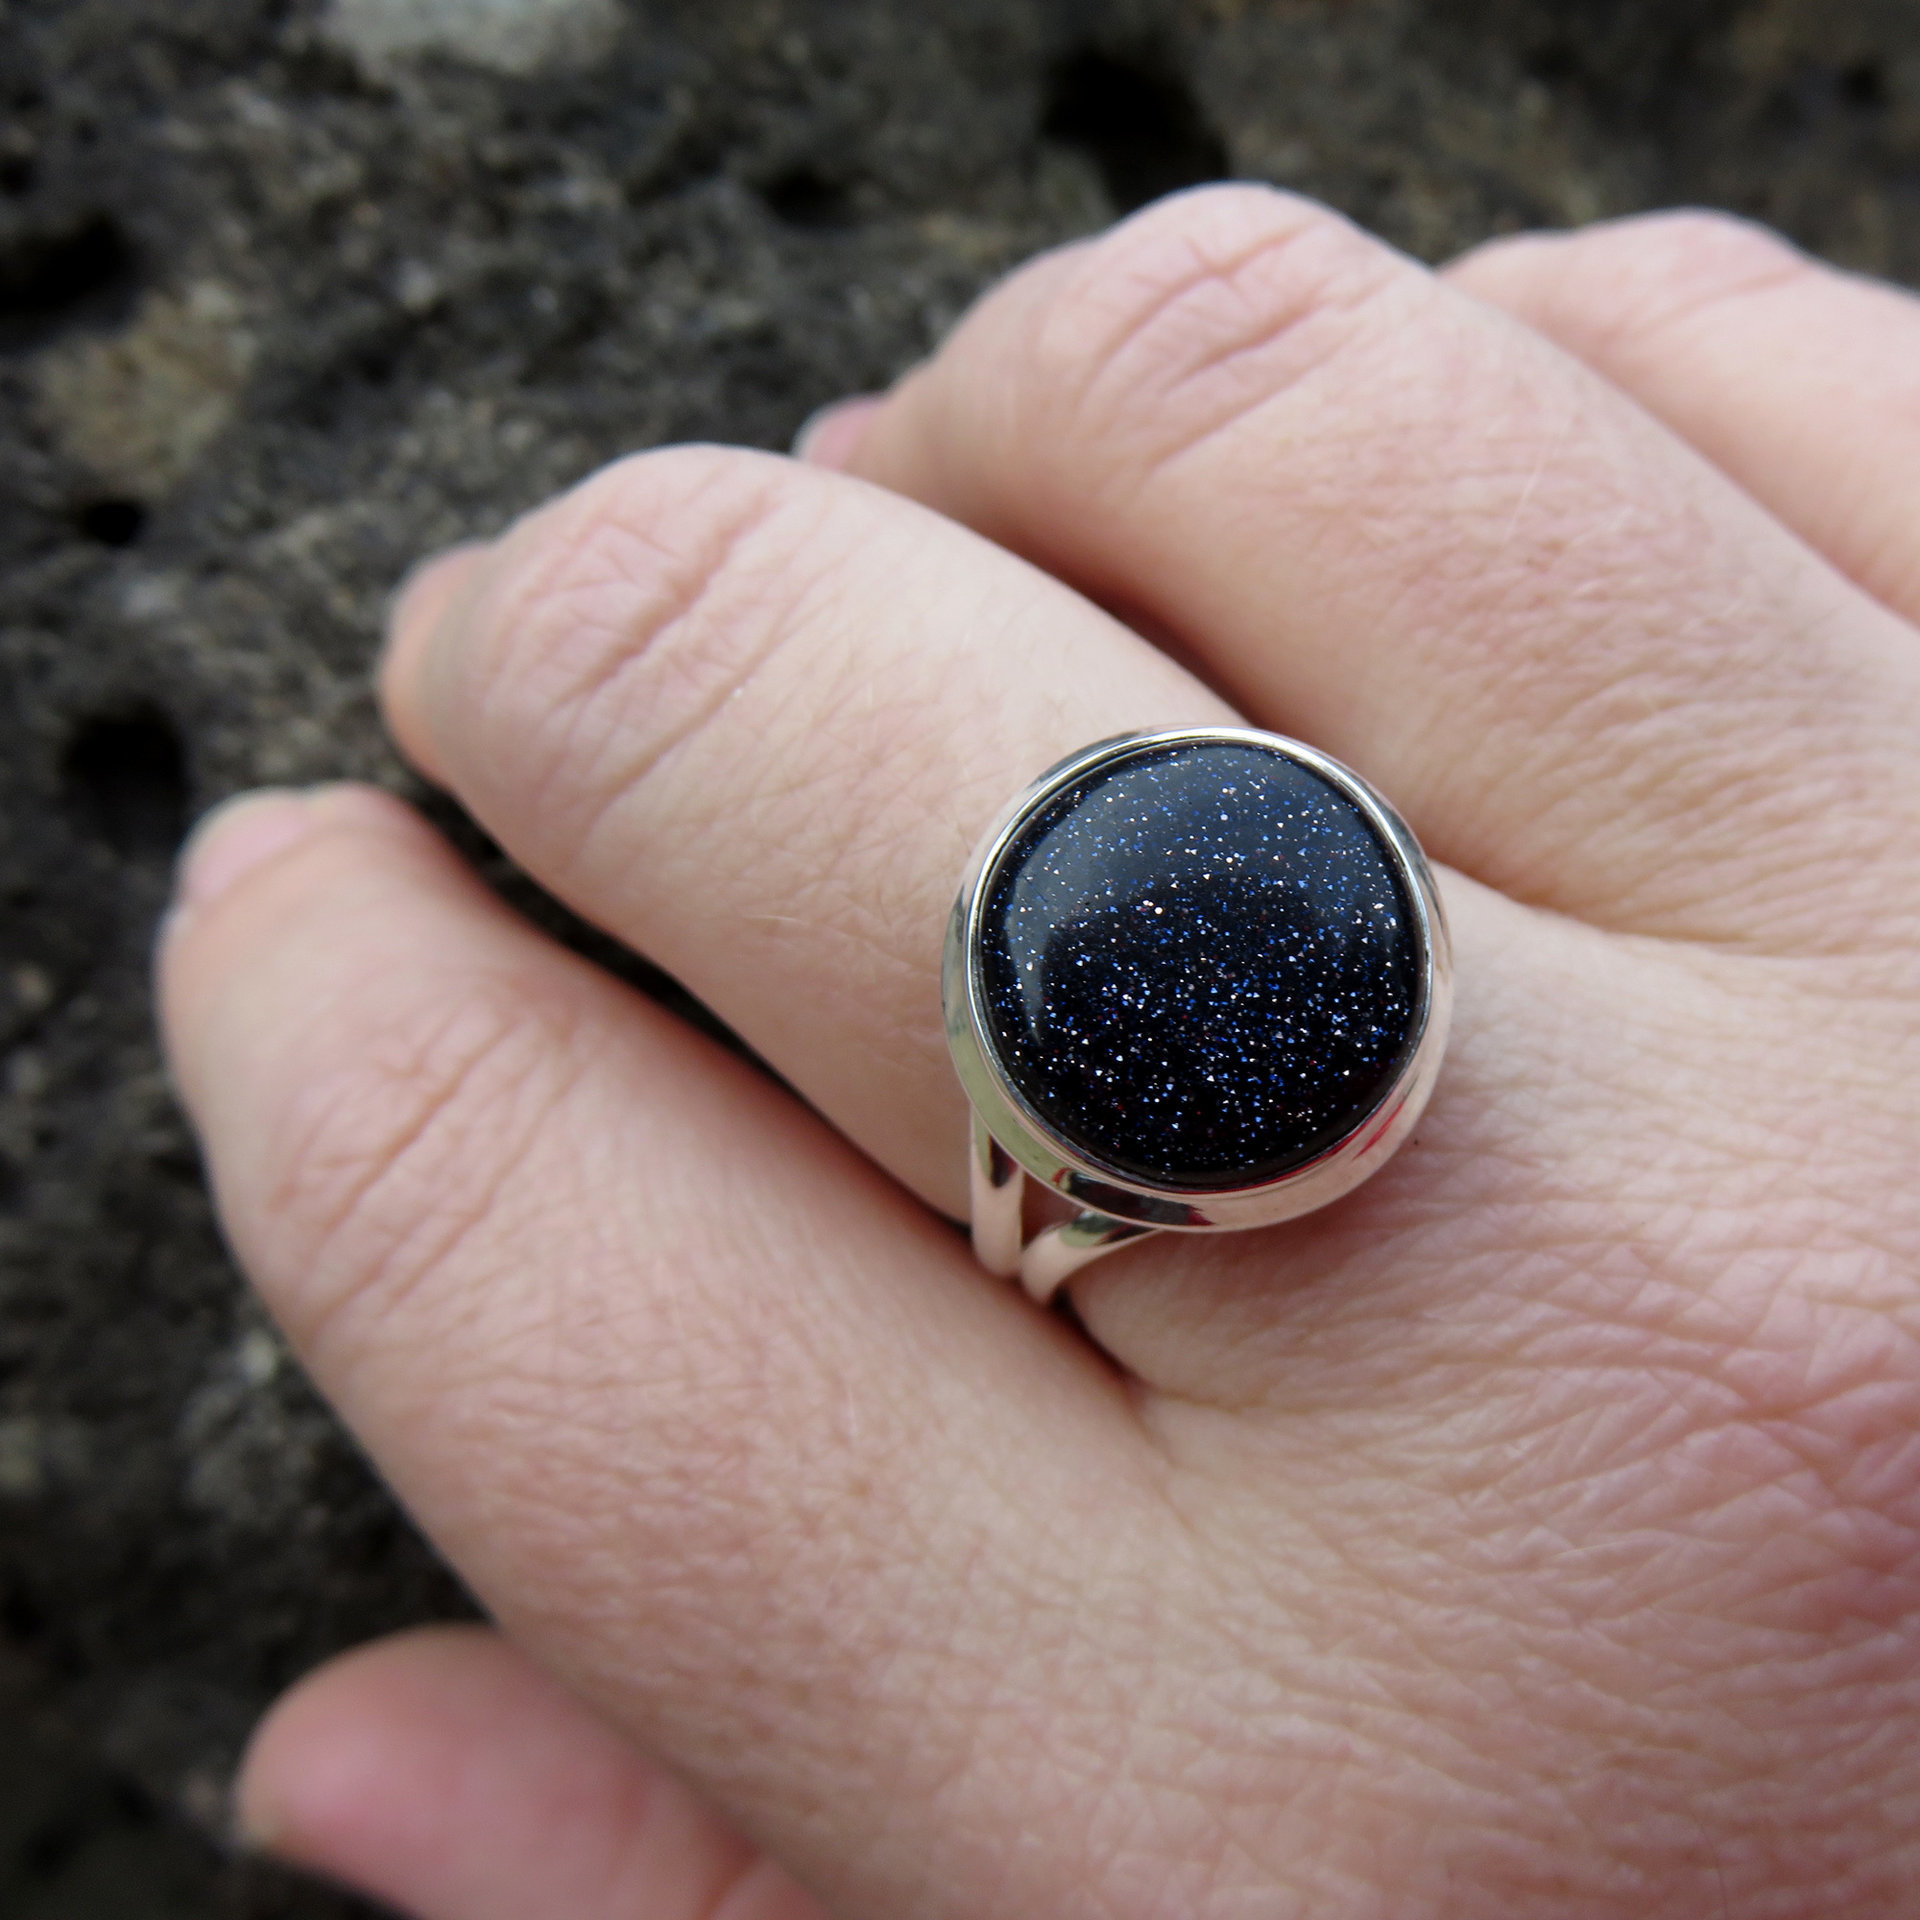 Sunstone Ring Size 9, Blue Round Cabochon, 925 Sterling Silver